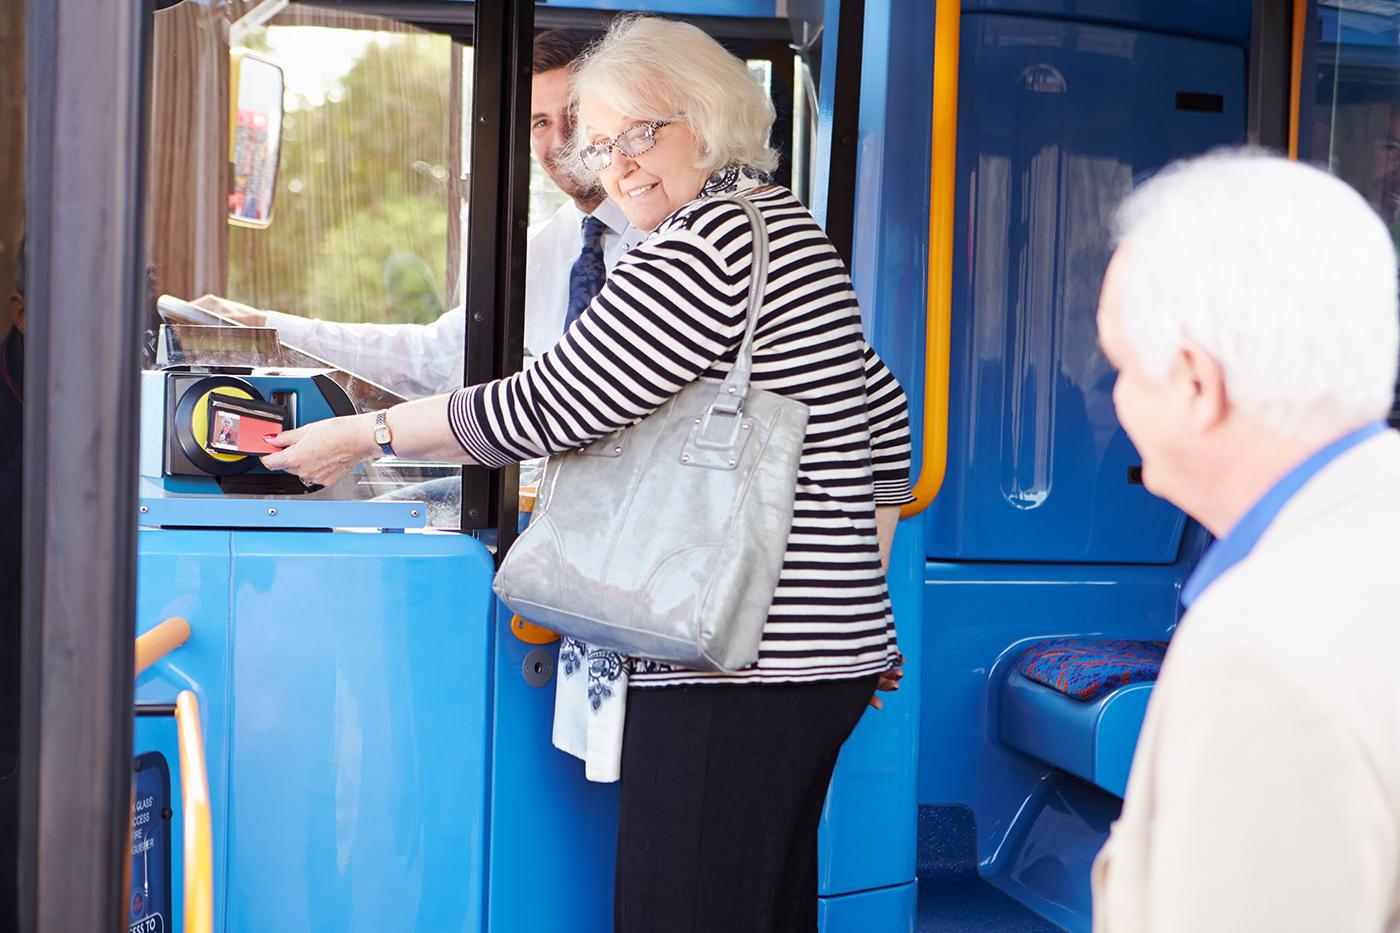 An older woman stands at the entrance of a bus tapping on with her pass, the back of an older man's head is in the foreground.